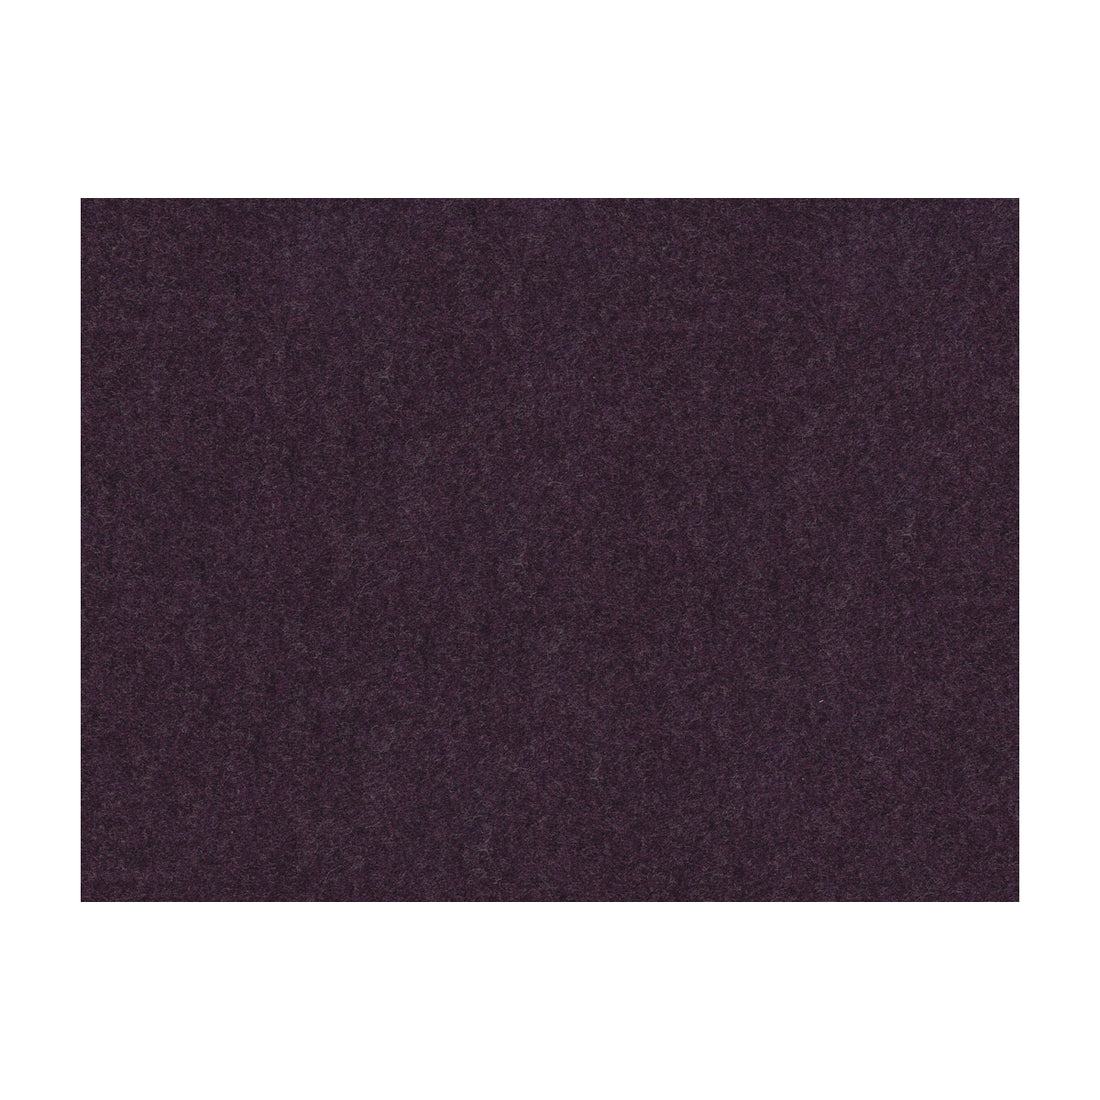 Chevalier Wool fabric in aubergine color - pattern 8013149.1011.0 - by Brunschwig &amp; Fils